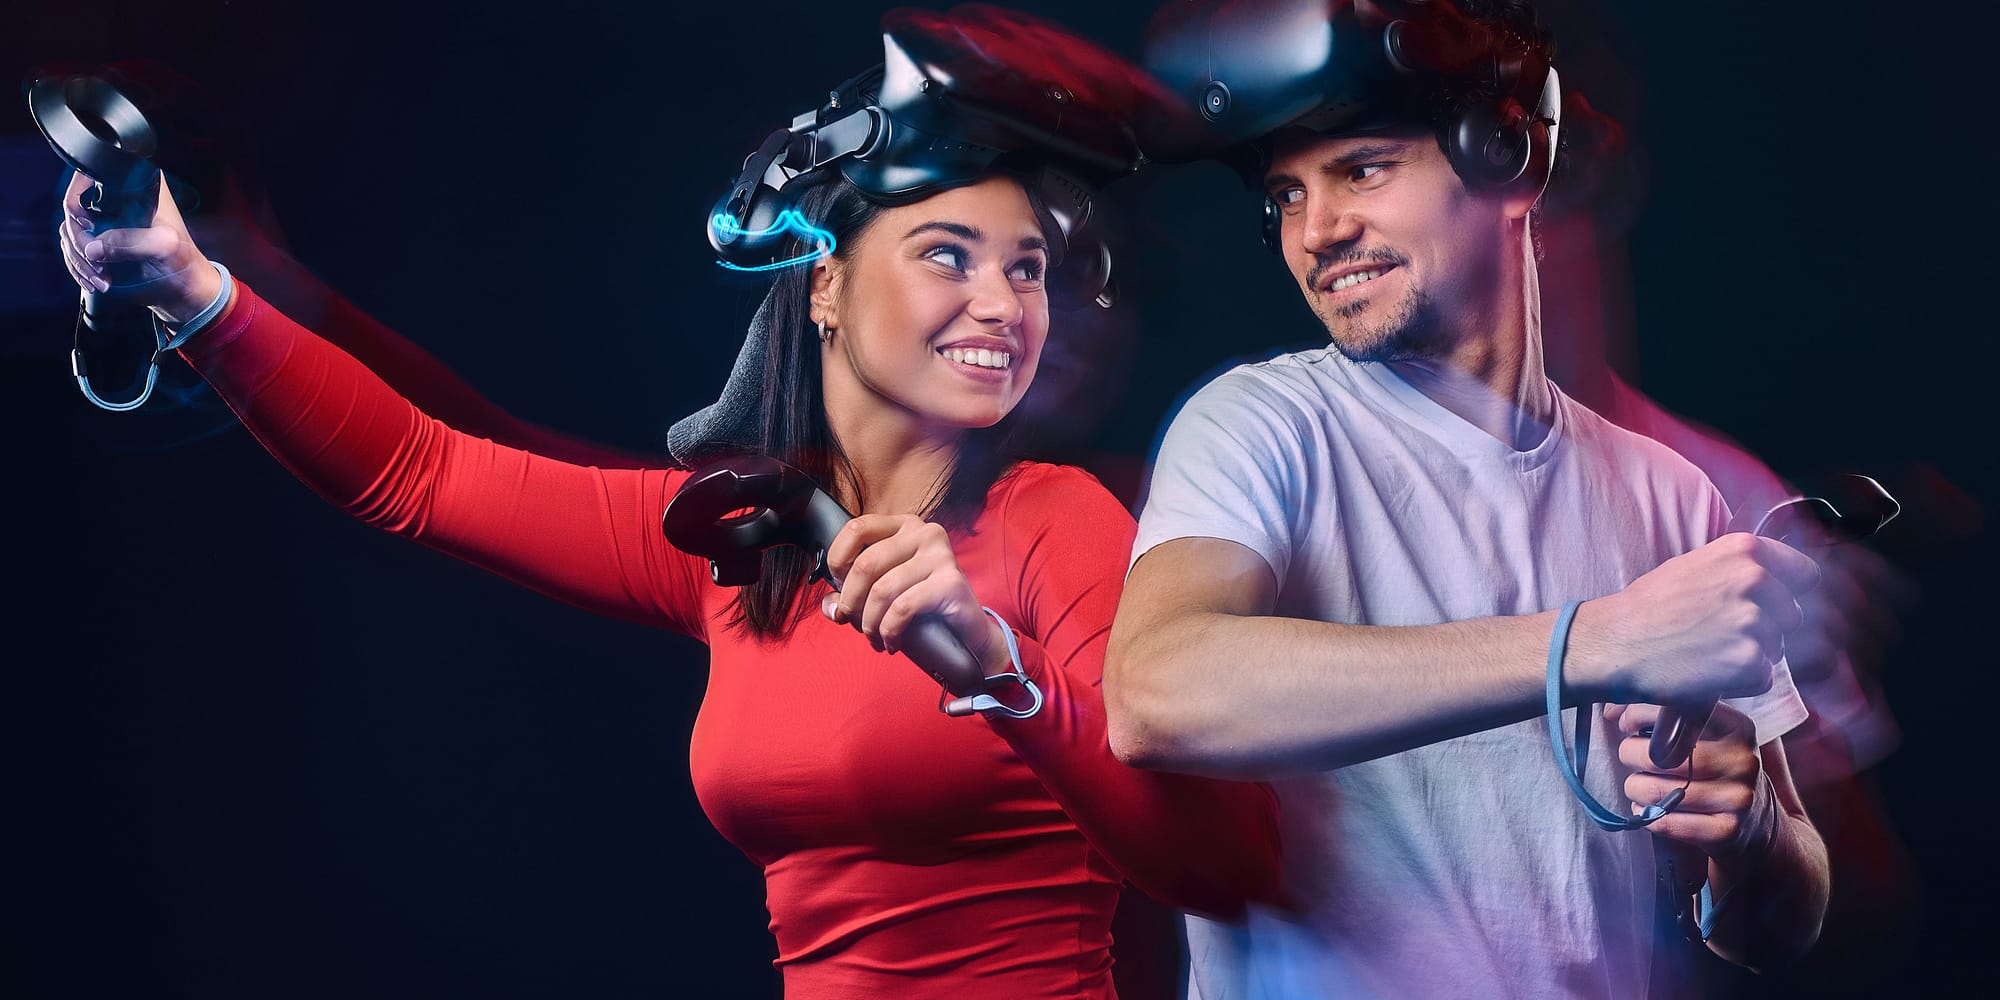 Toronto VR could be the perfect date night out